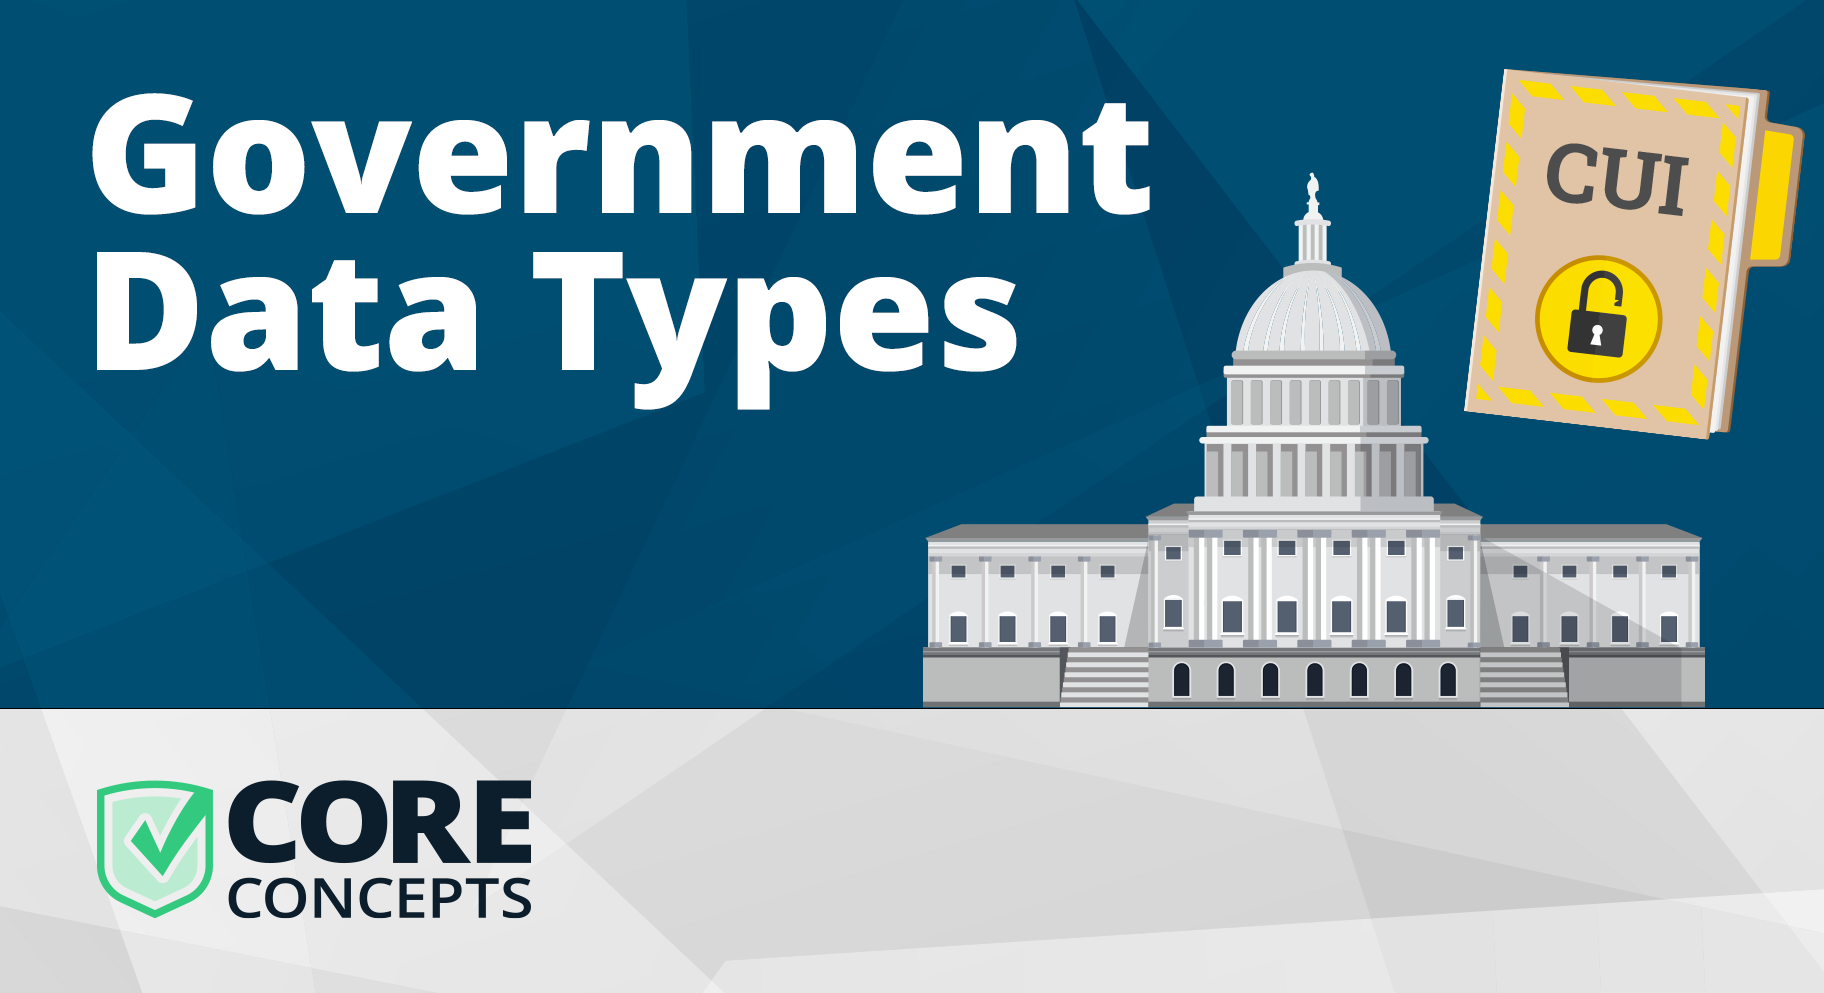 Core Concepts: Government Data Types